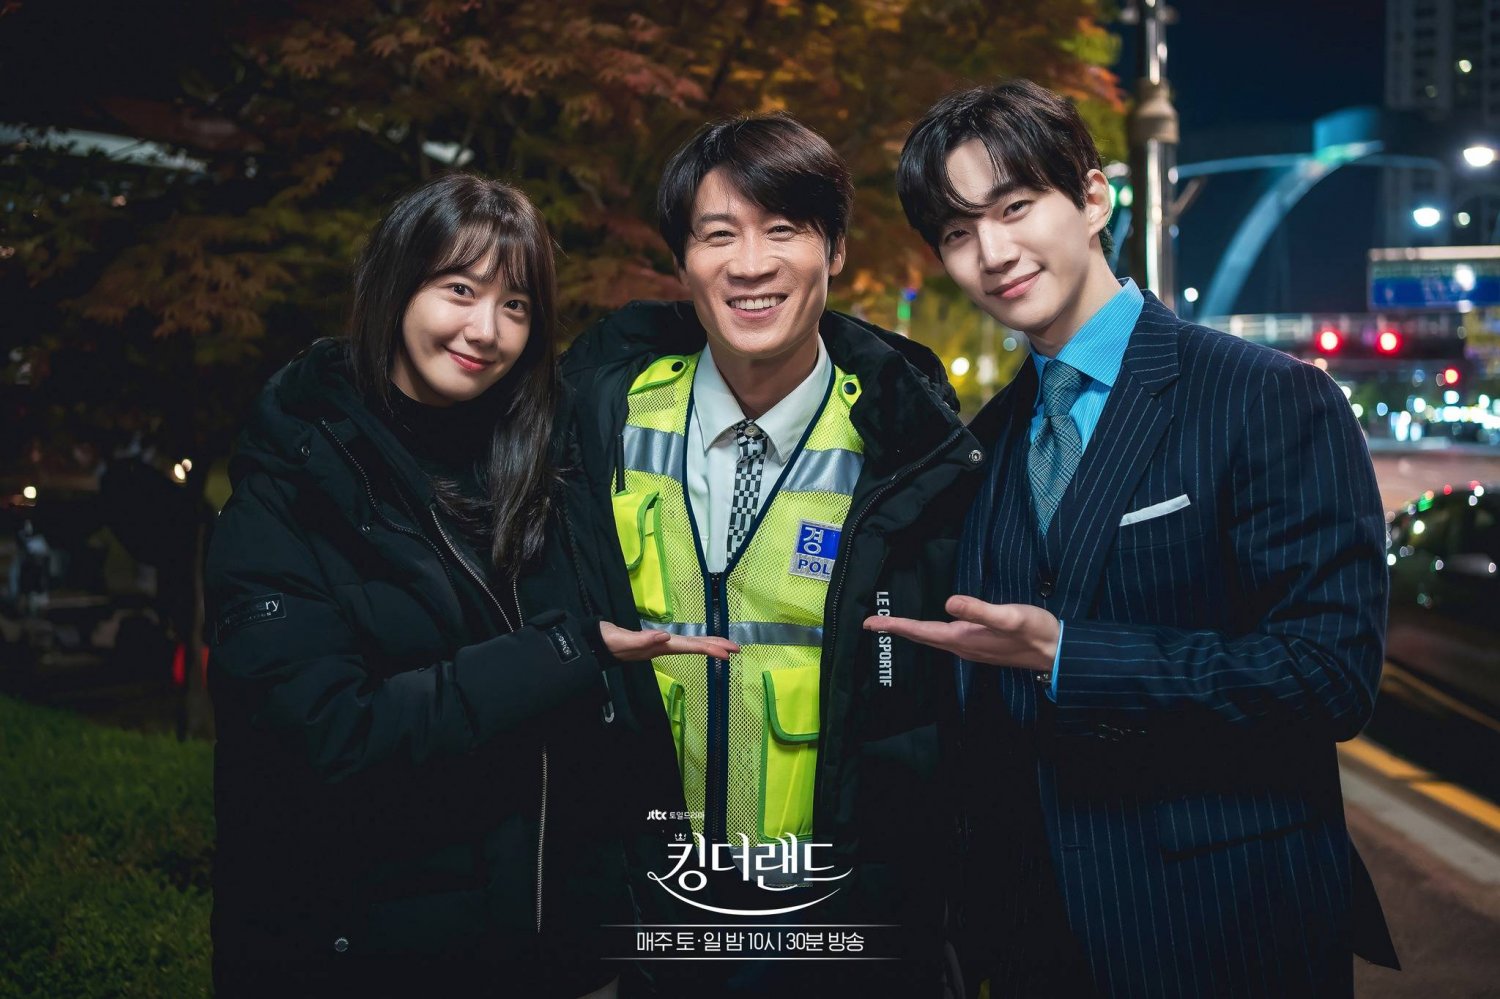 Photos] New Behind the Scenes Images Added for the Korean Drama